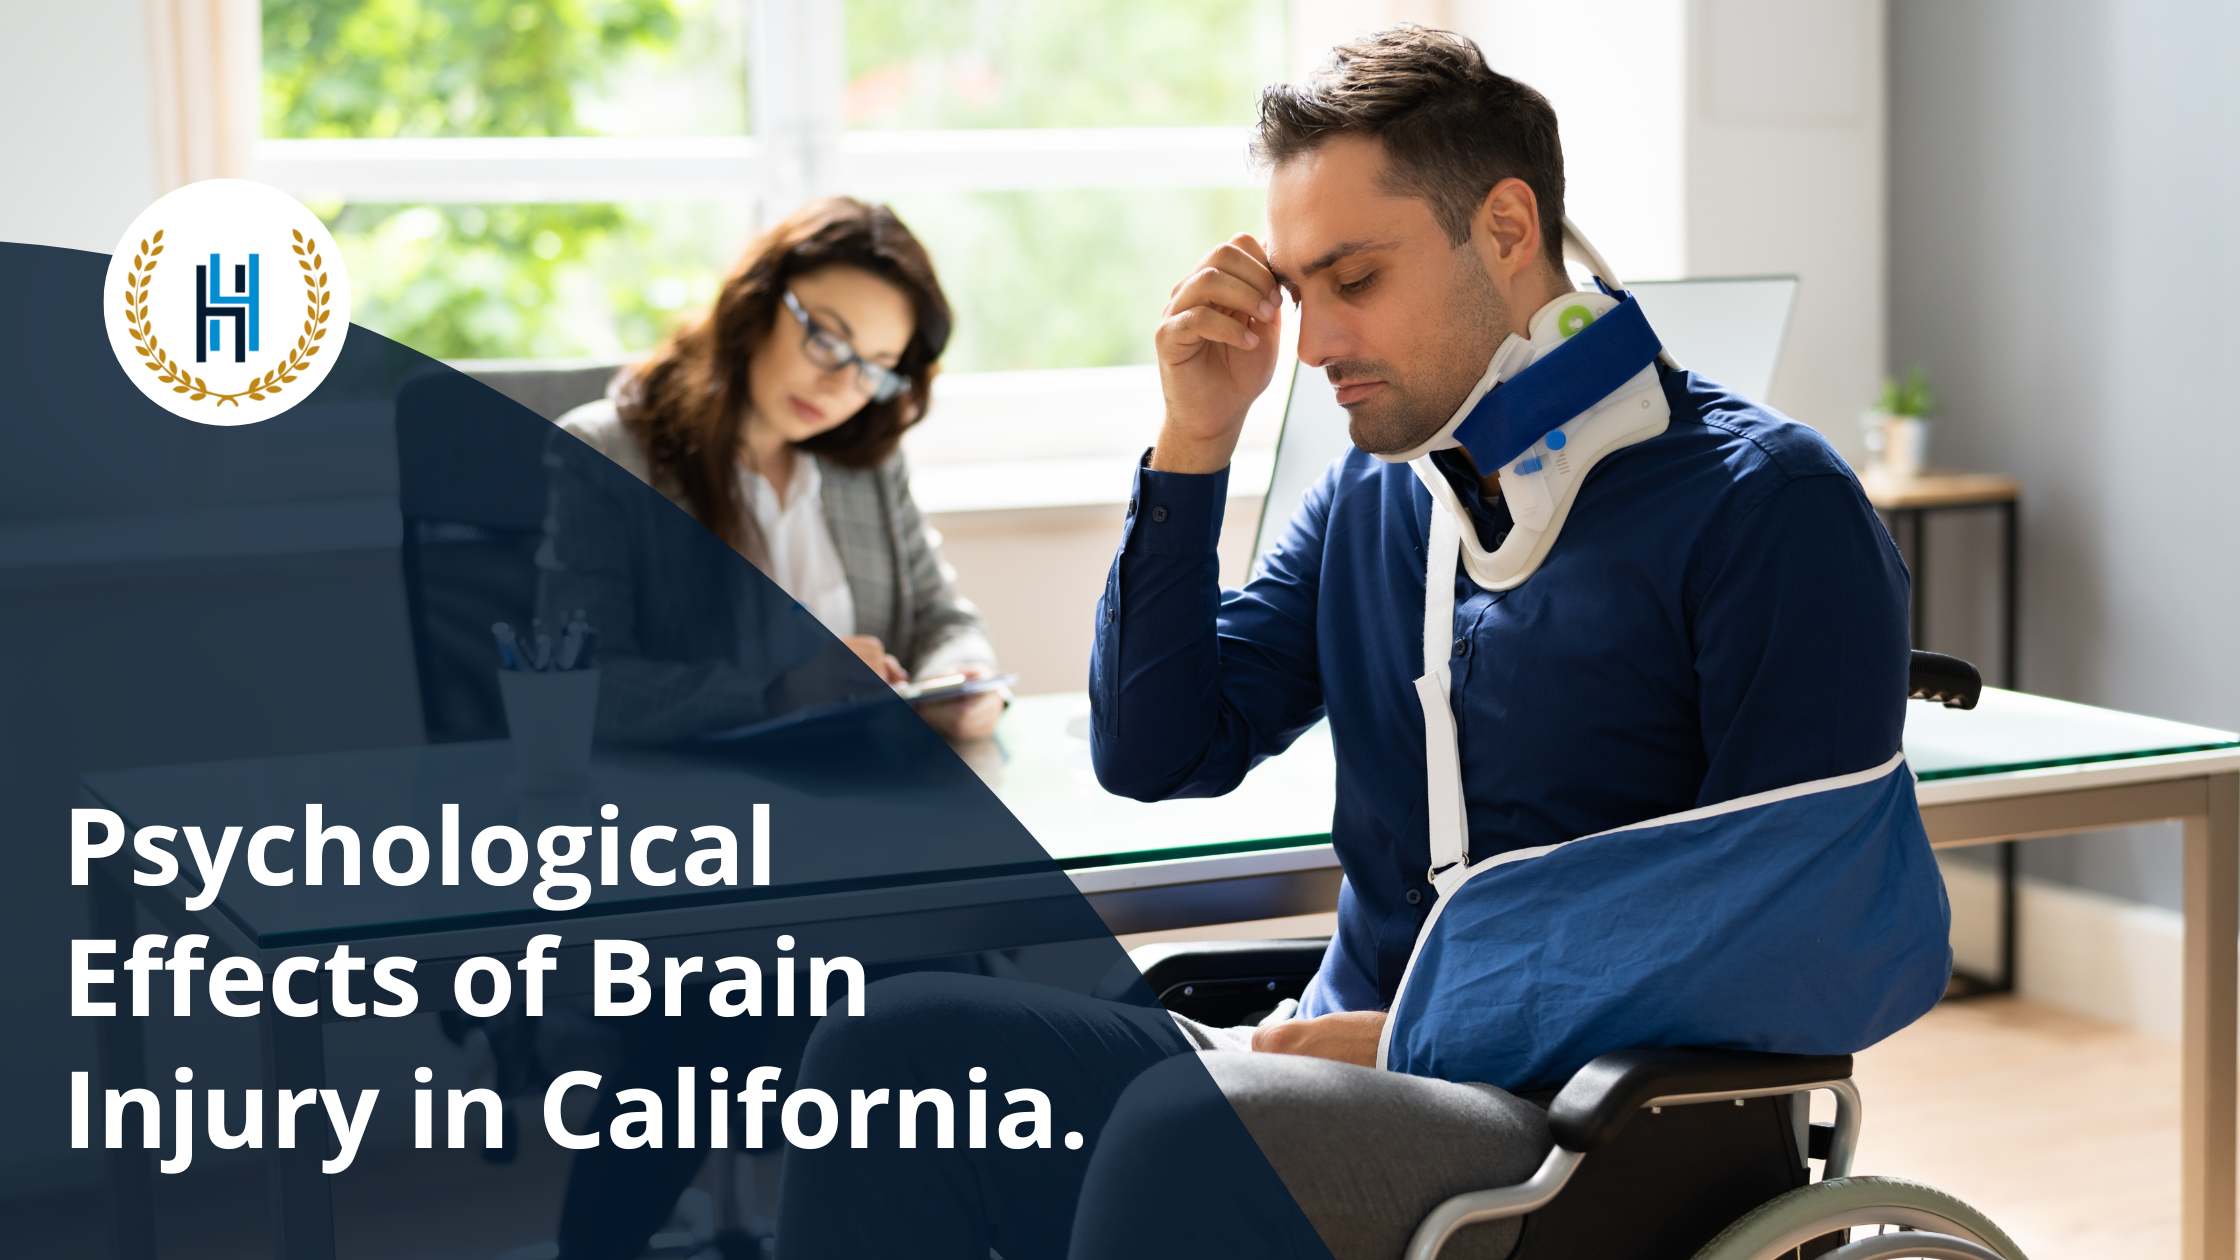 Psychological Effects of Brain Injury in California. 2H Law Firm